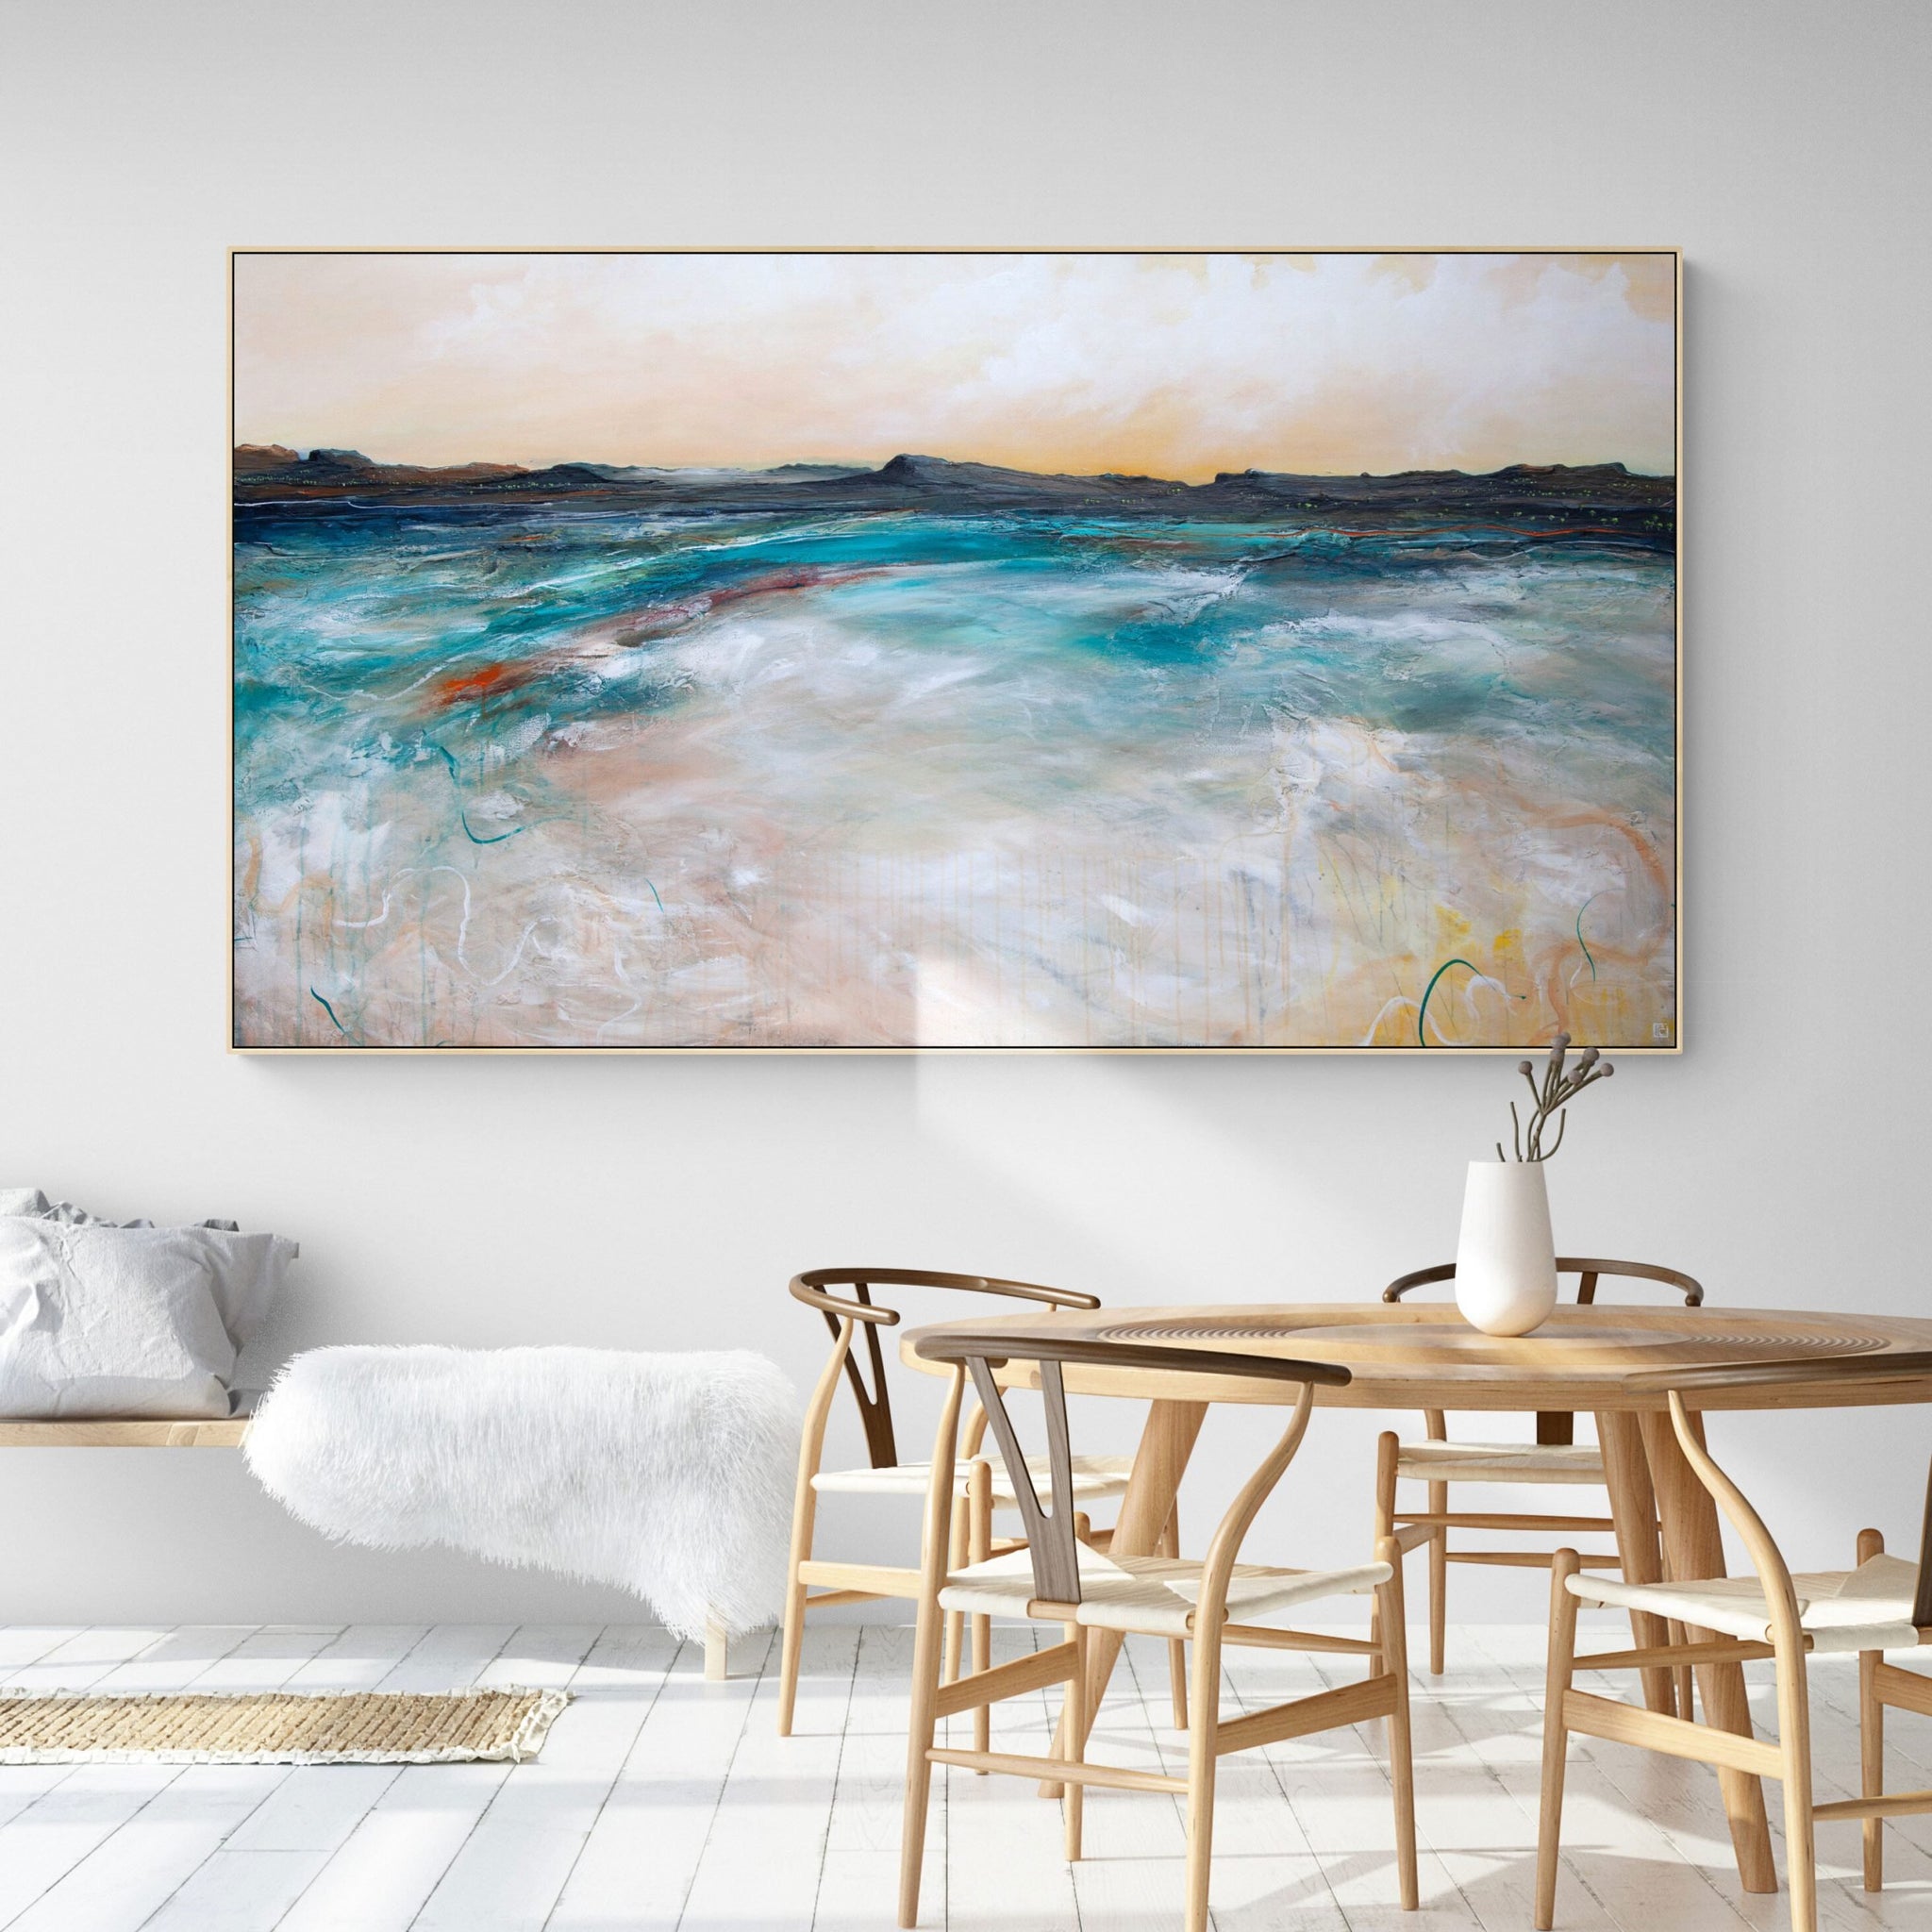 Passing The Ocean Swell(180X100cm)